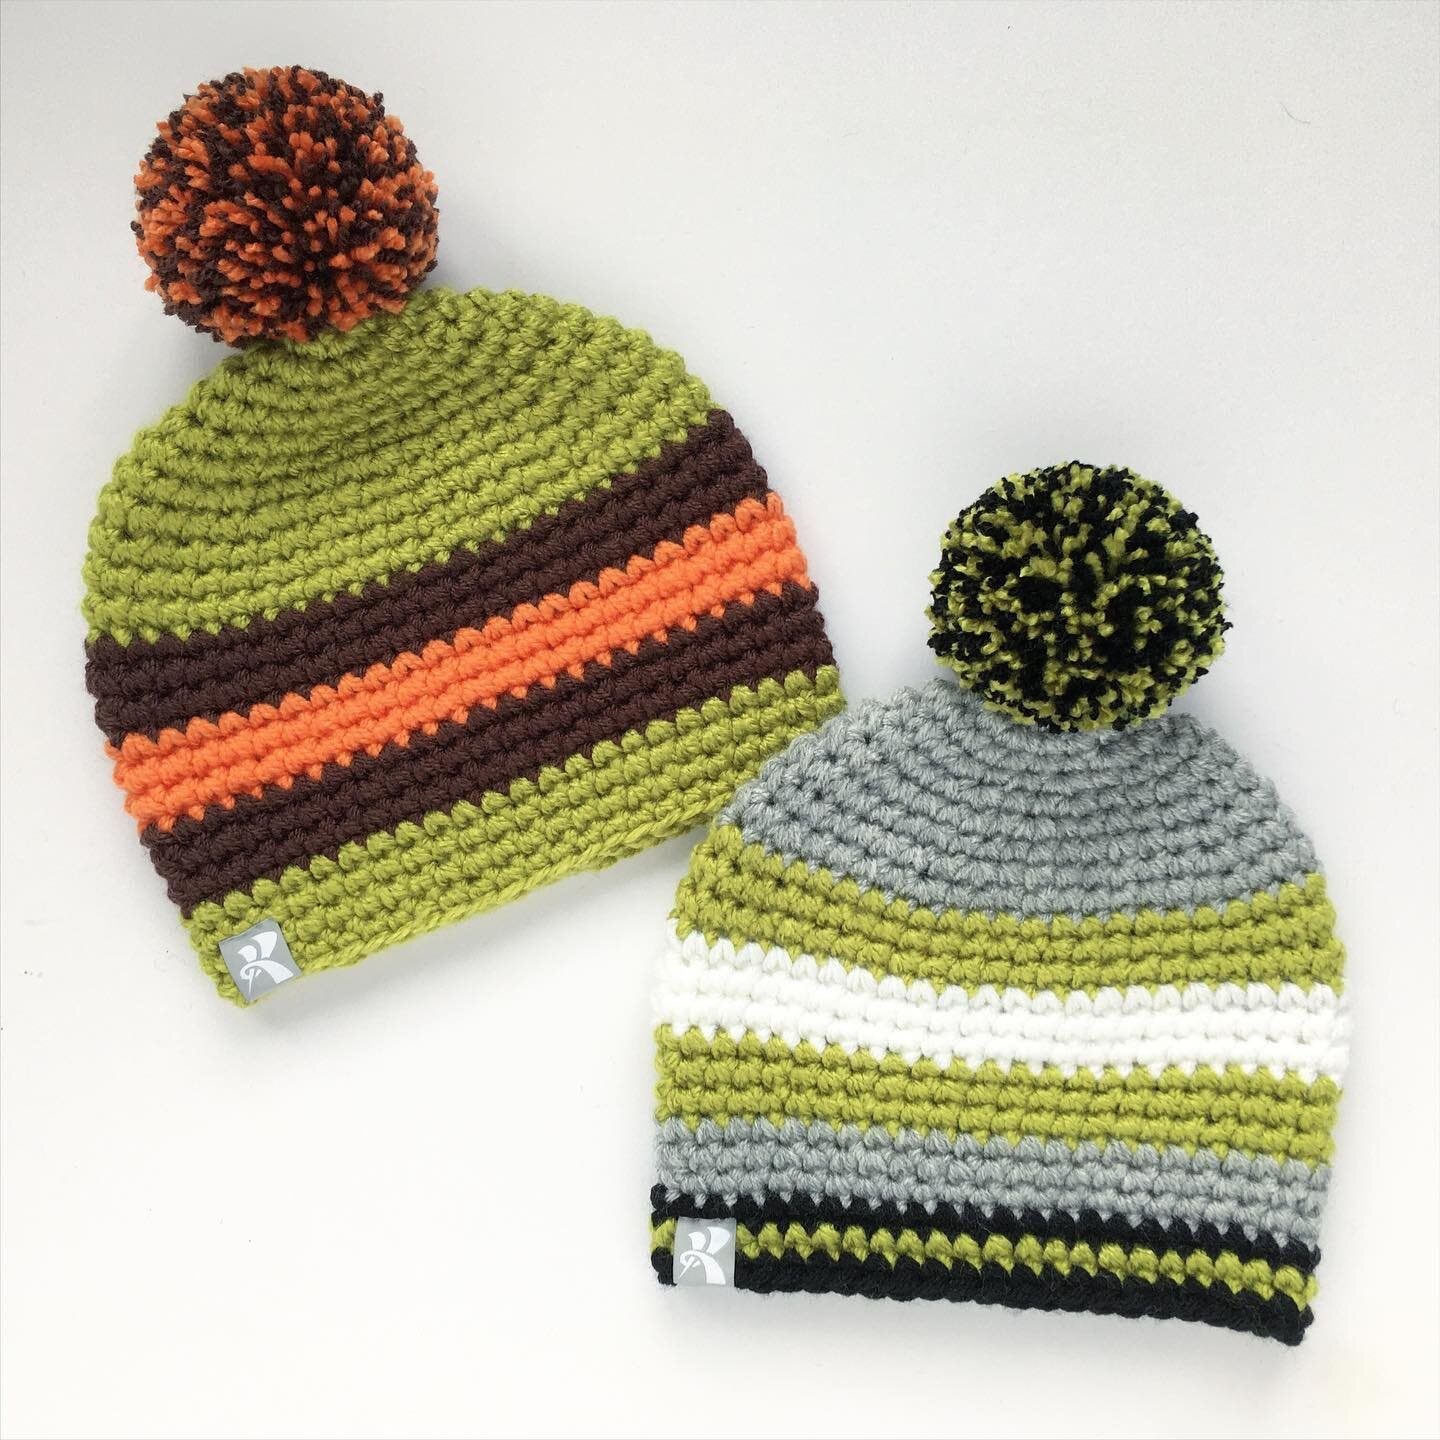 Made this lovely pair for @thrill_seeker_adventurer today. Thank you for your orders!🙏😊 I really enjoyed using #chartreuse again. I used it all the time when I first started making beanies. 💚

www.kbeanies.com
__________________________________✍️
